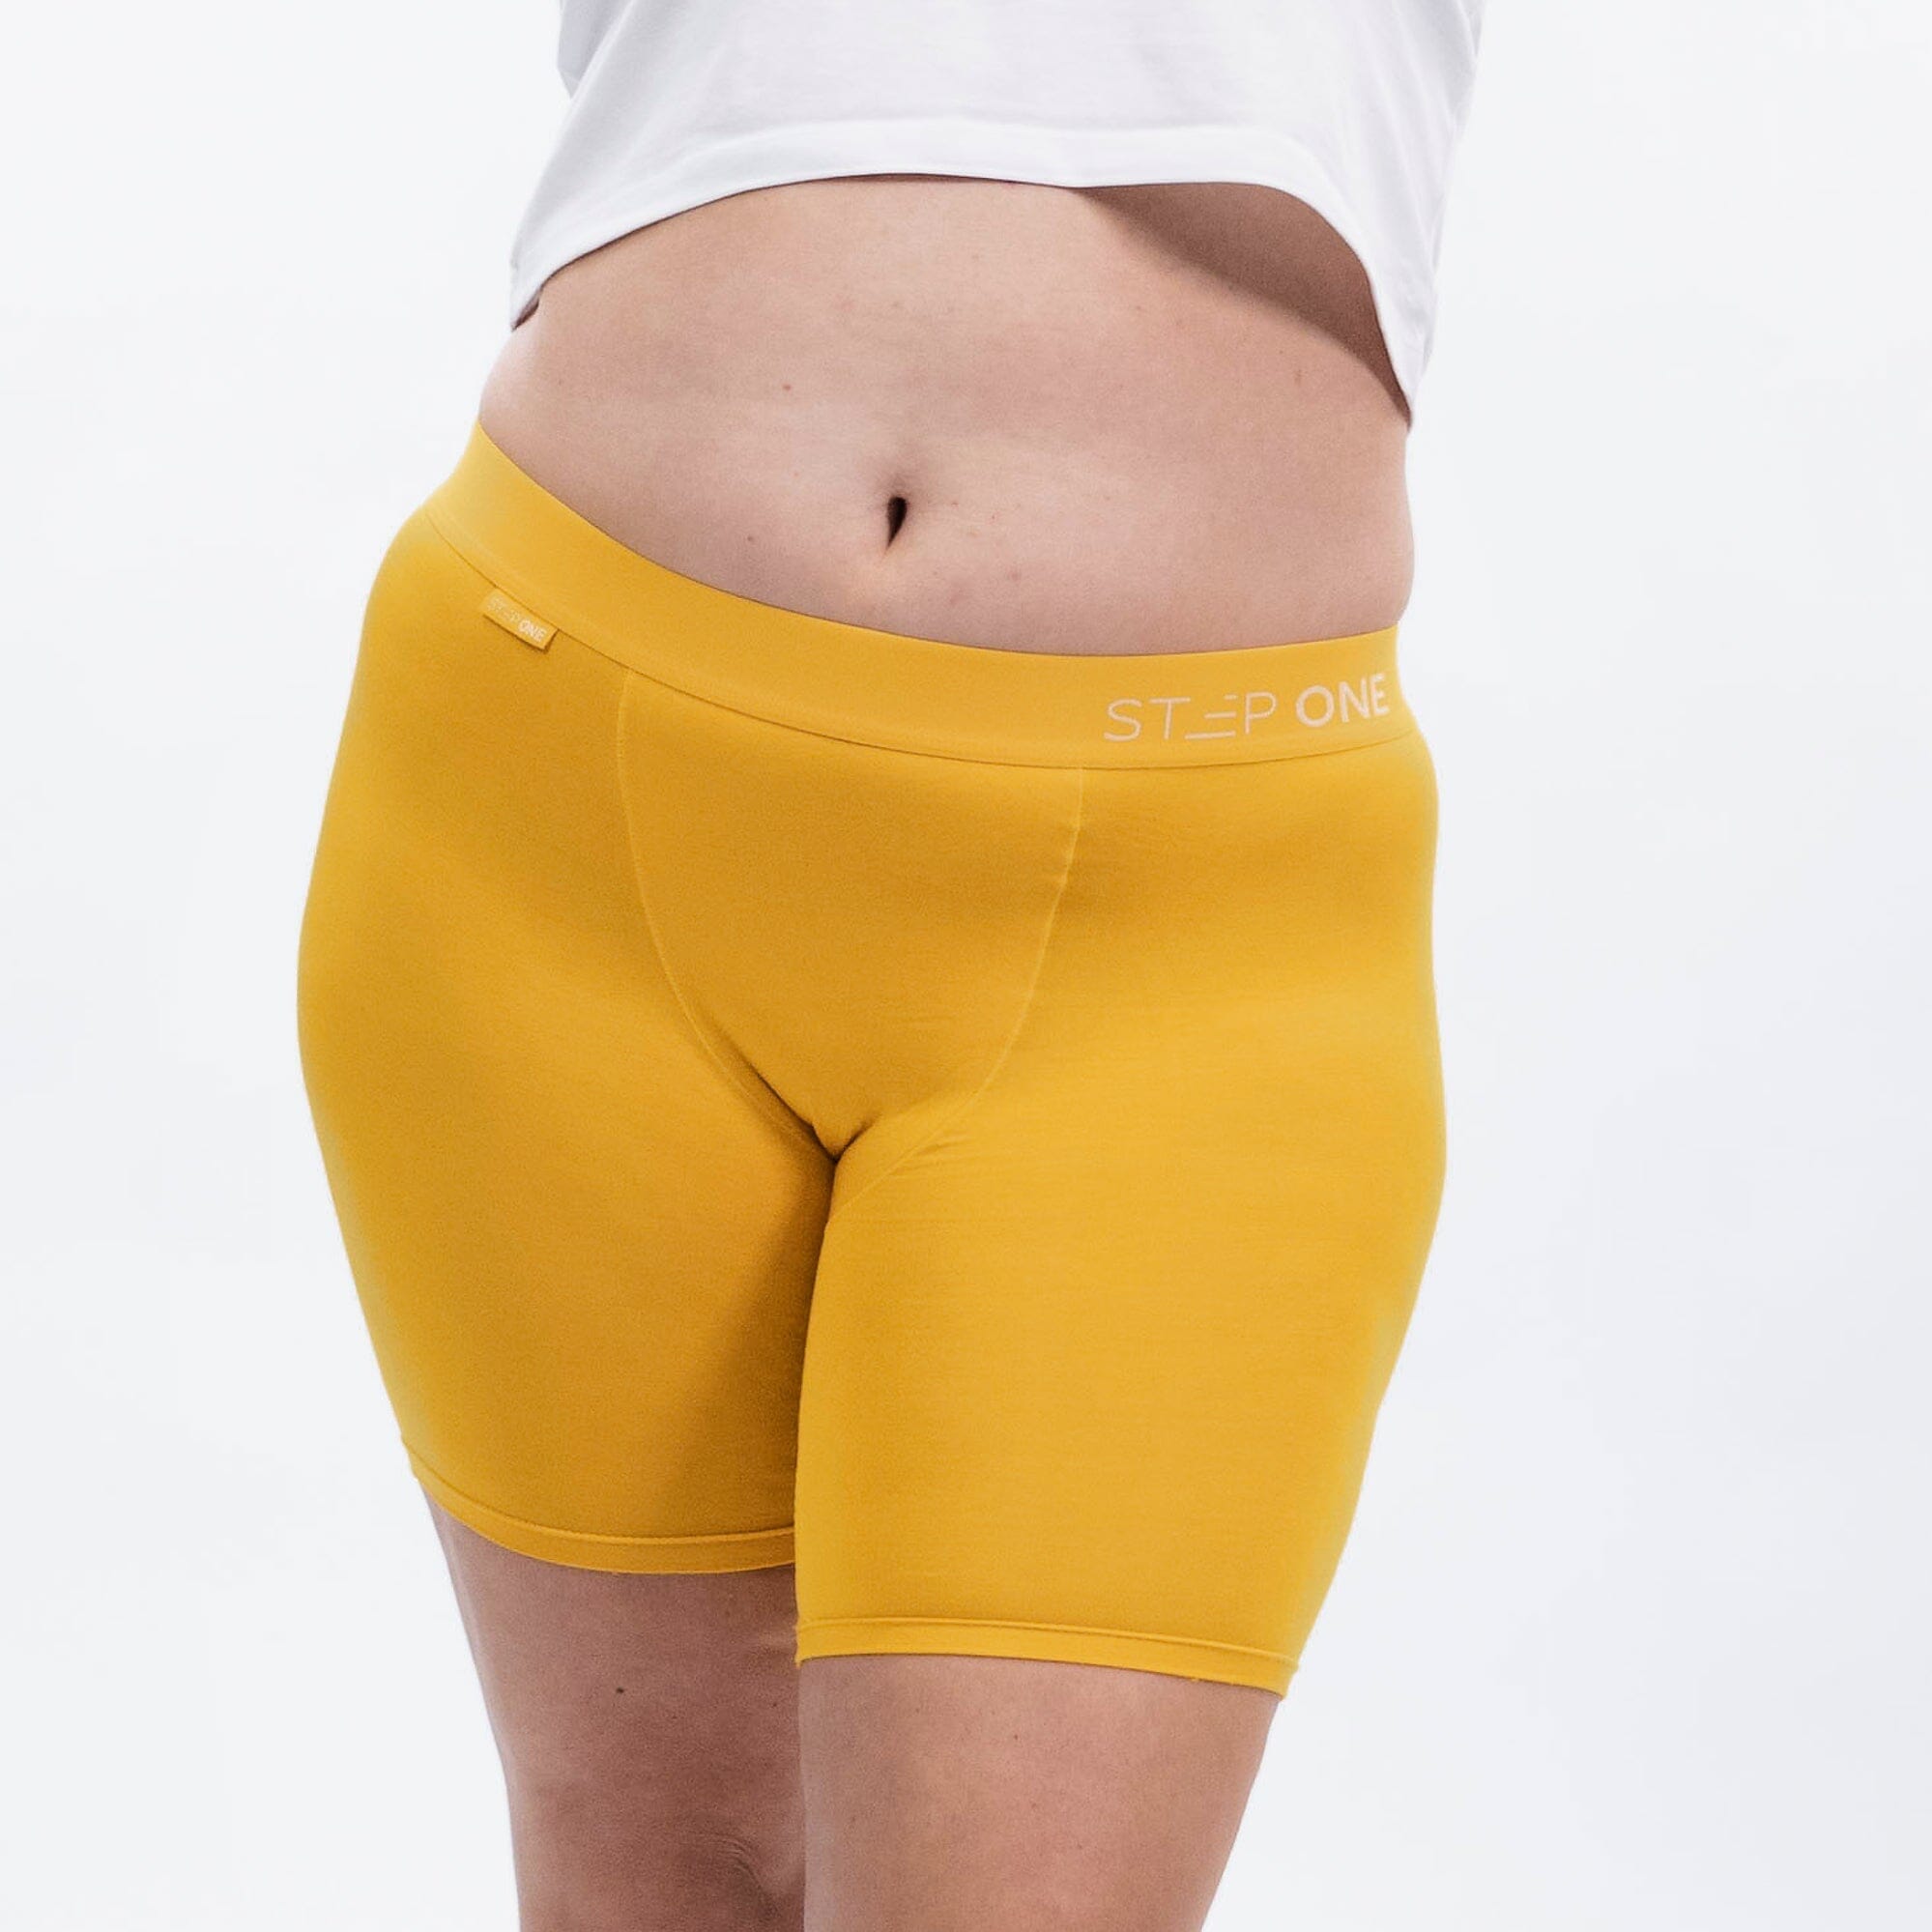 Women's Boxer Brief - Cheeky Cheddars - Model - #size_XL